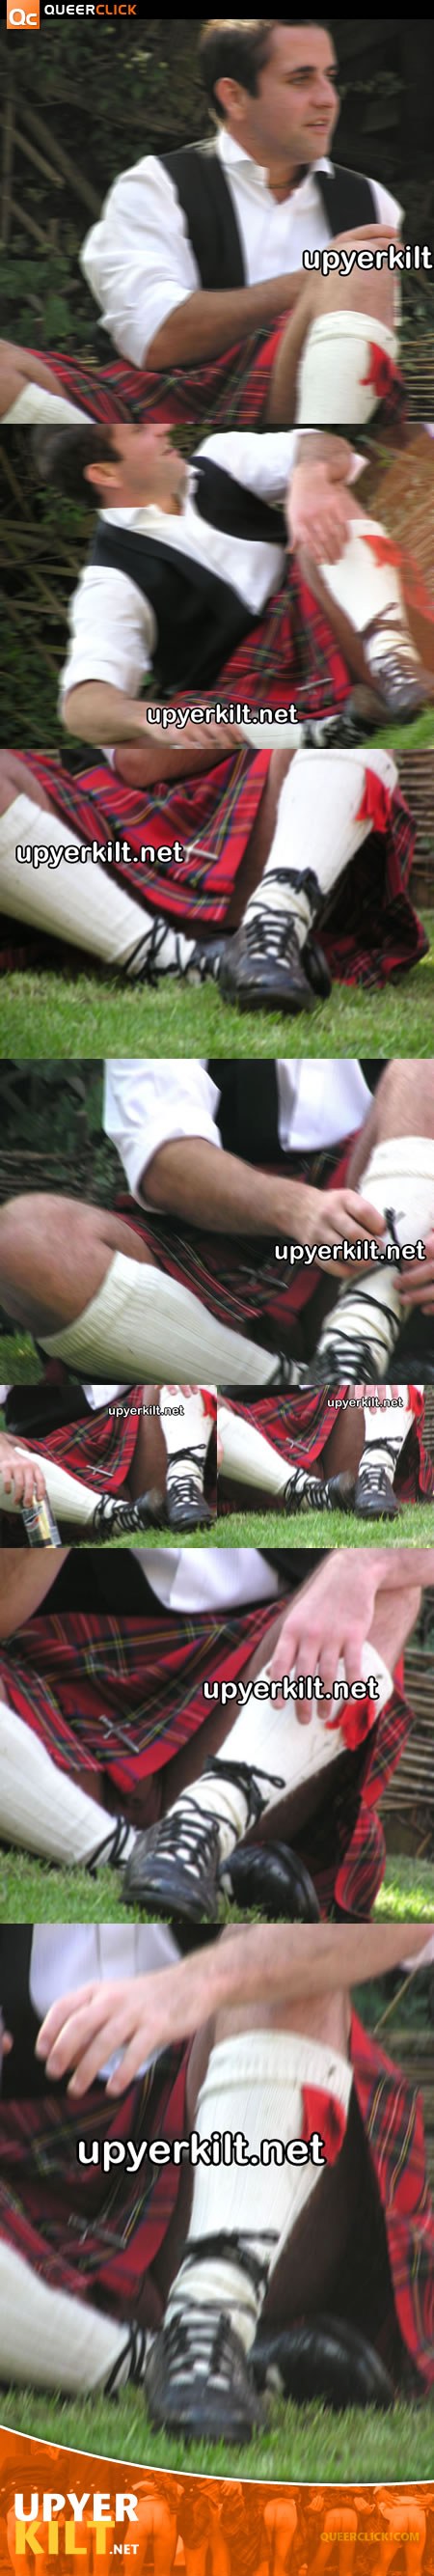 Uncut Monster Cocks In Kilts - UpYerKilt at QueerClick - Page 3 of 6